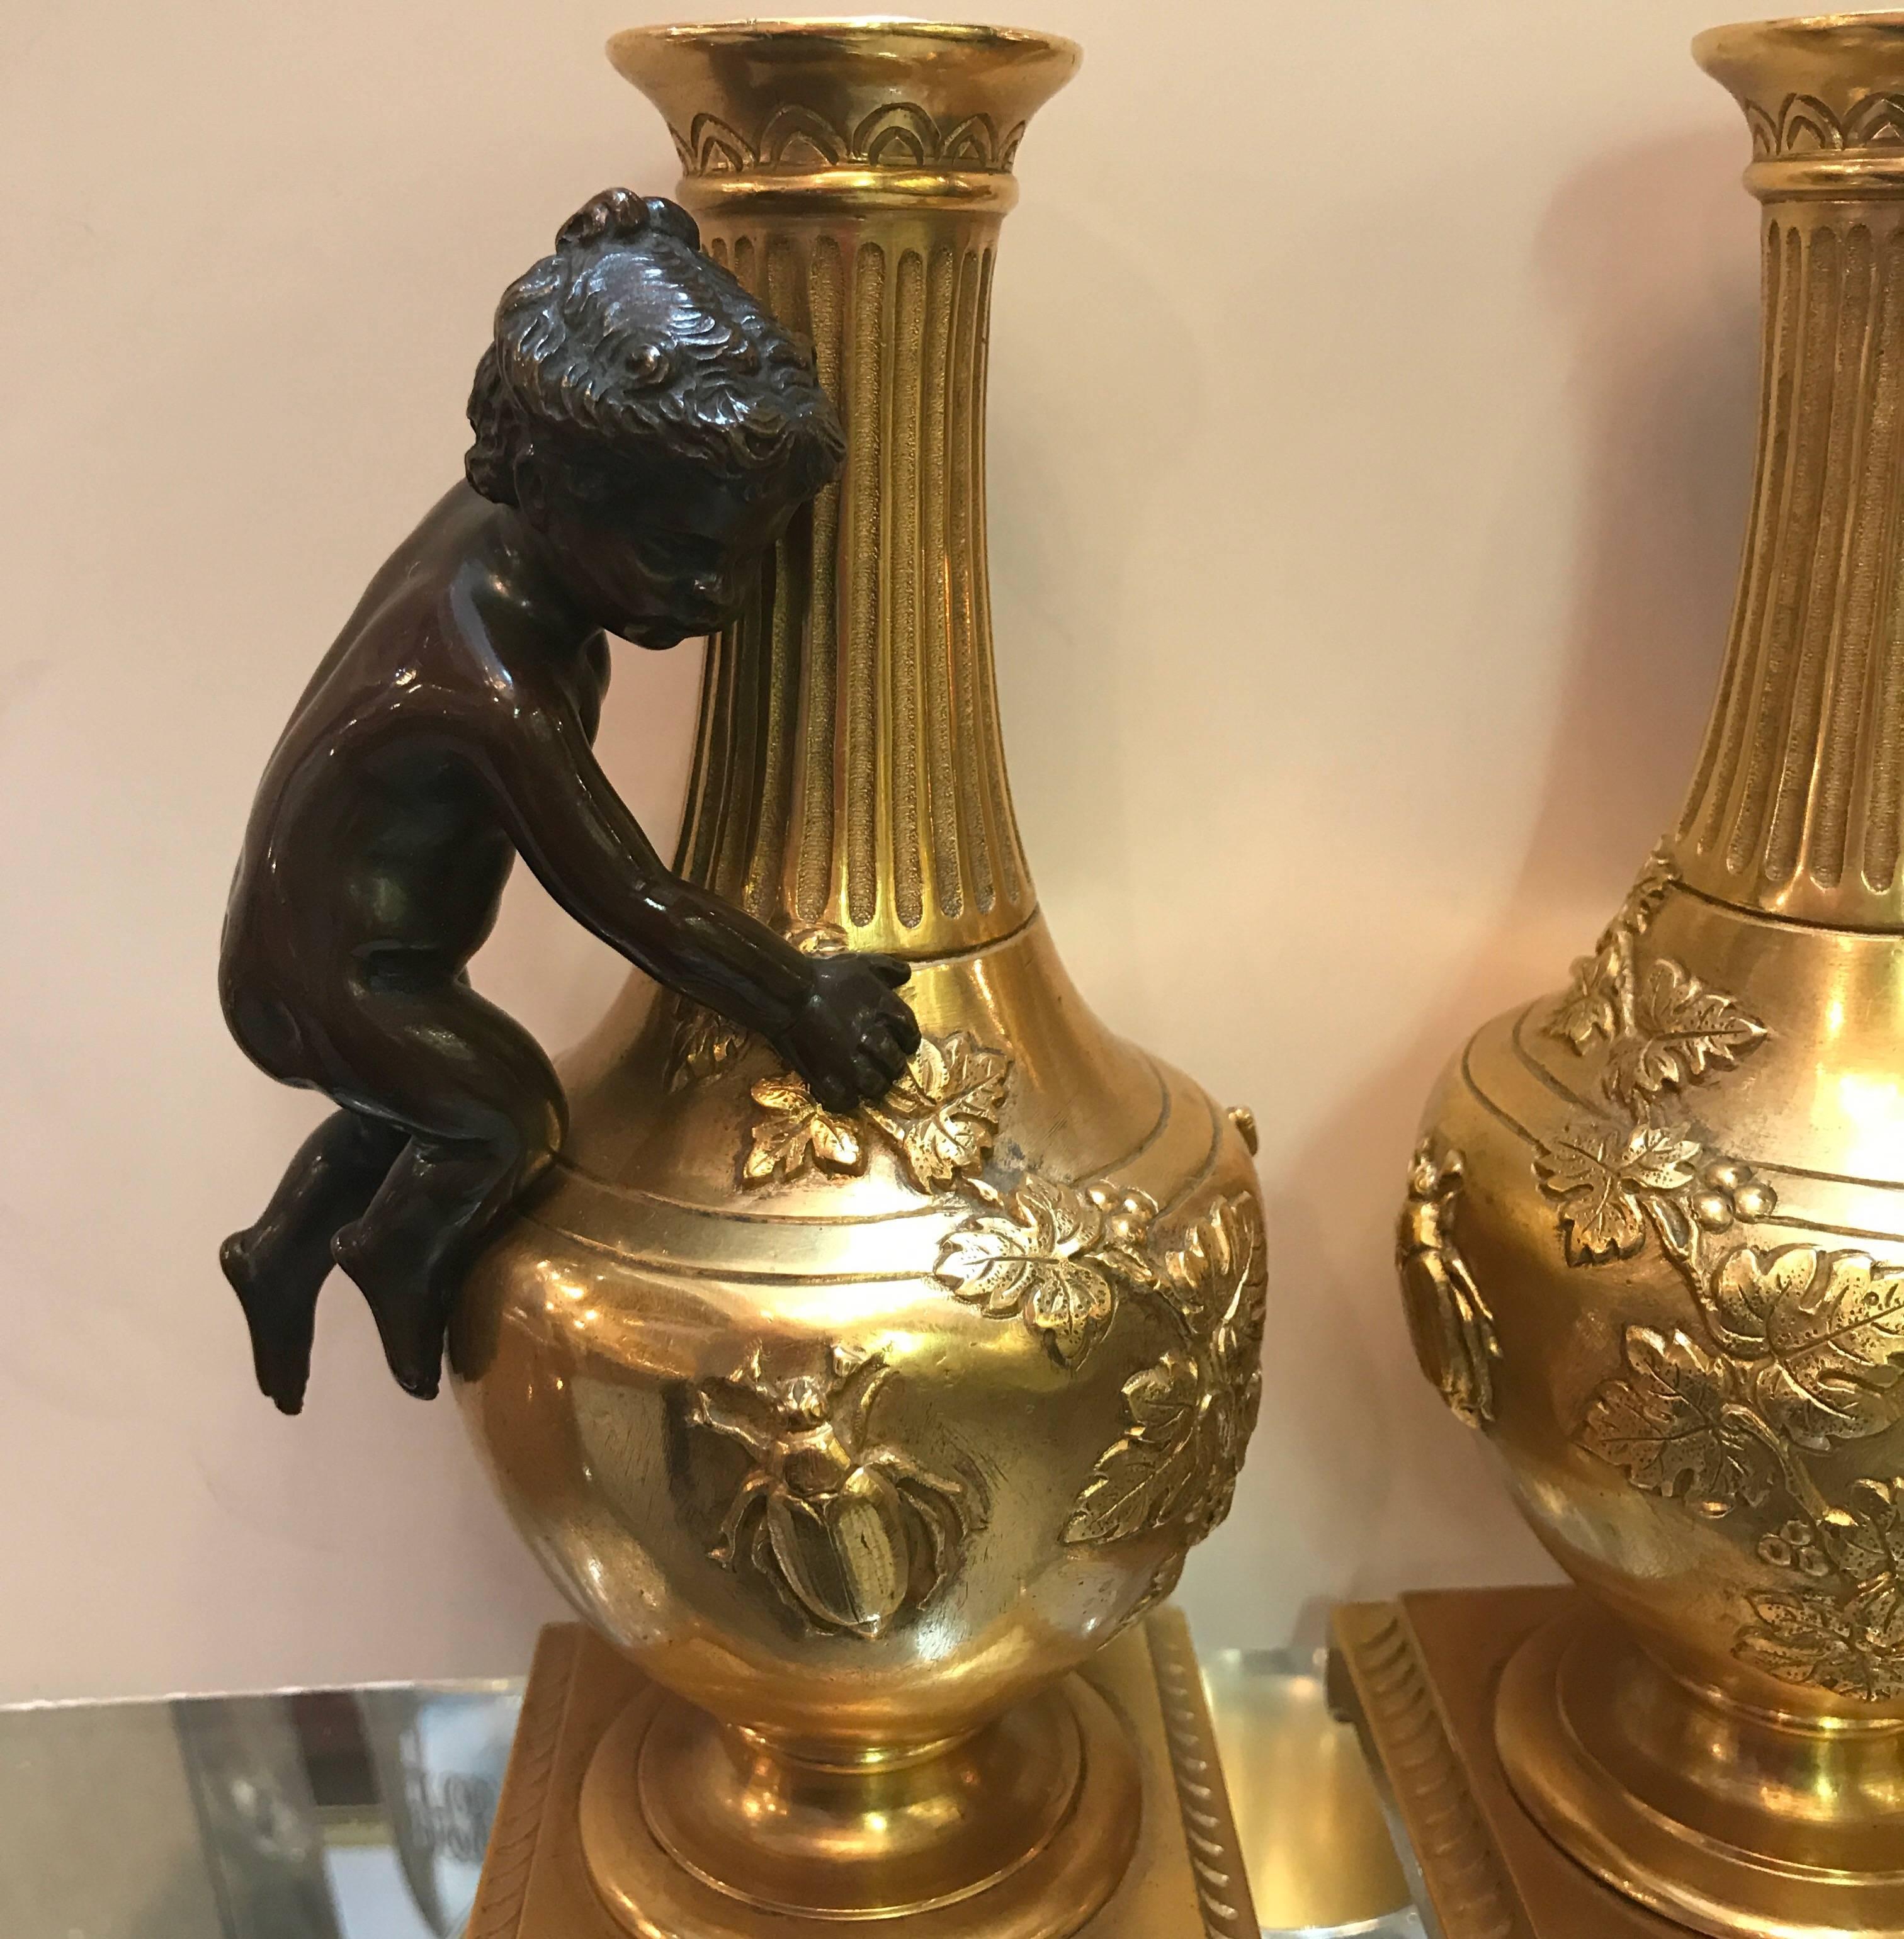 A pair of French bronze gilt urns. The urns with cast patinated putti handles. All original and in excellent condition, France, last quarter of the 19th century.